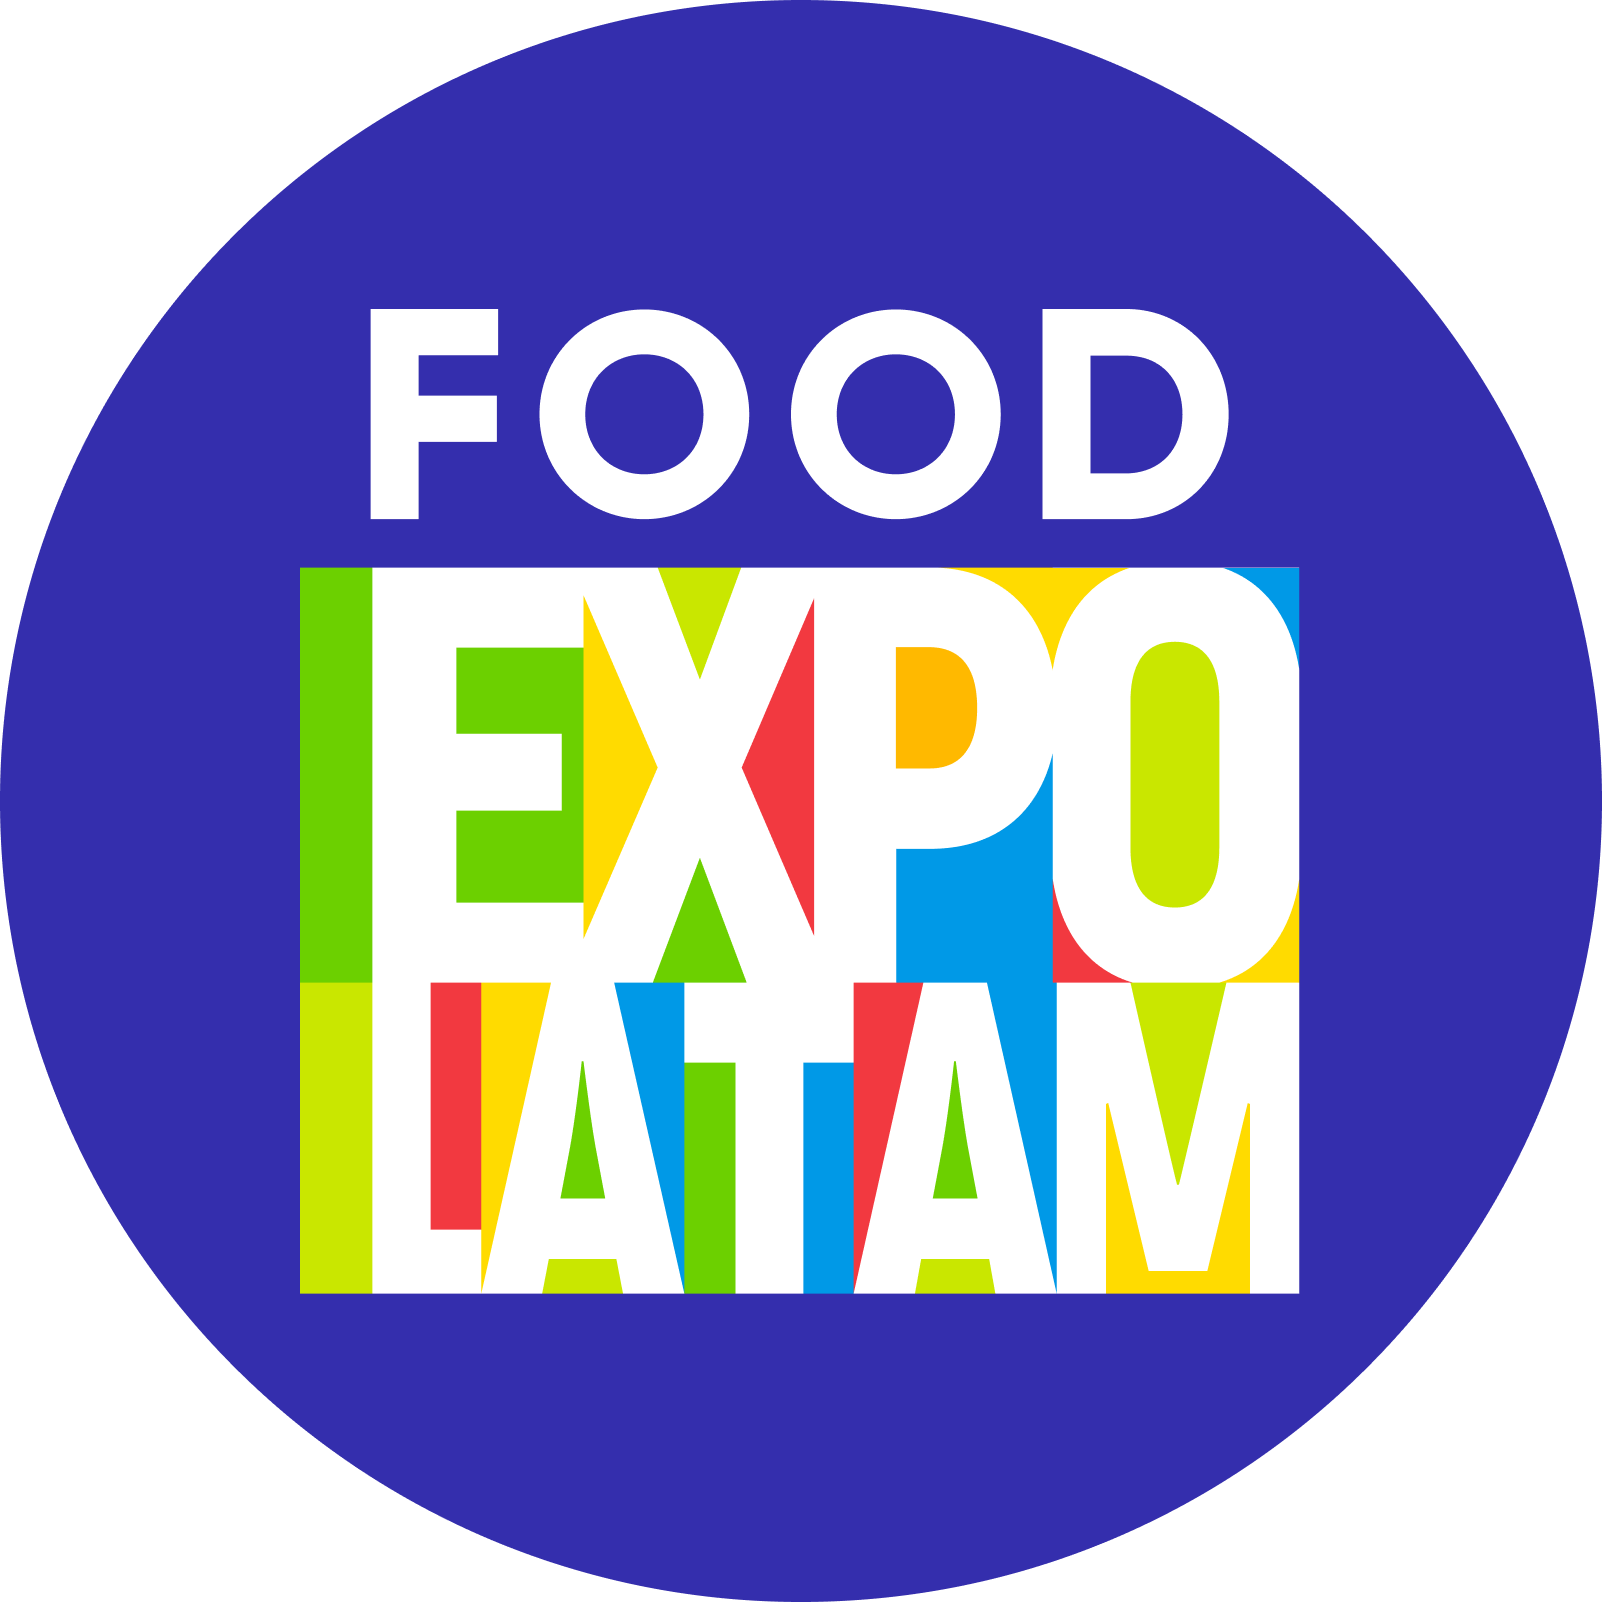 FOOD EXPO LATAM to continue until May 31, 2021